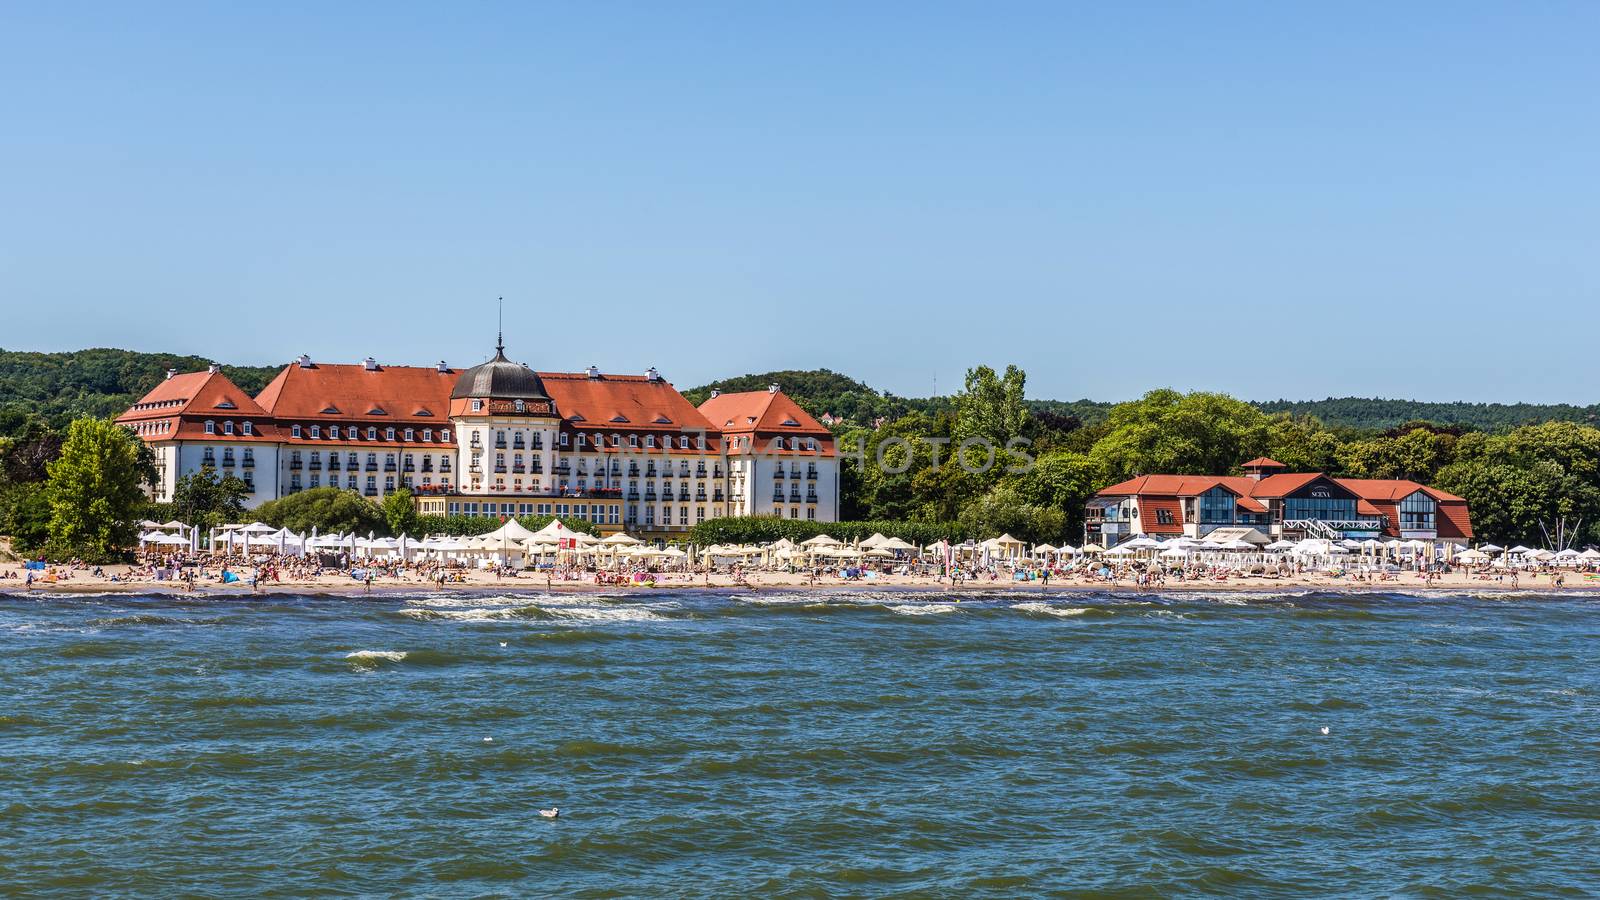 Five stars Sofitel Grand Sopot. Stylish hotel, built in 1927 in Art Noveau and neo-baroque style, remains one of the most recognizable landmarks of the resort.